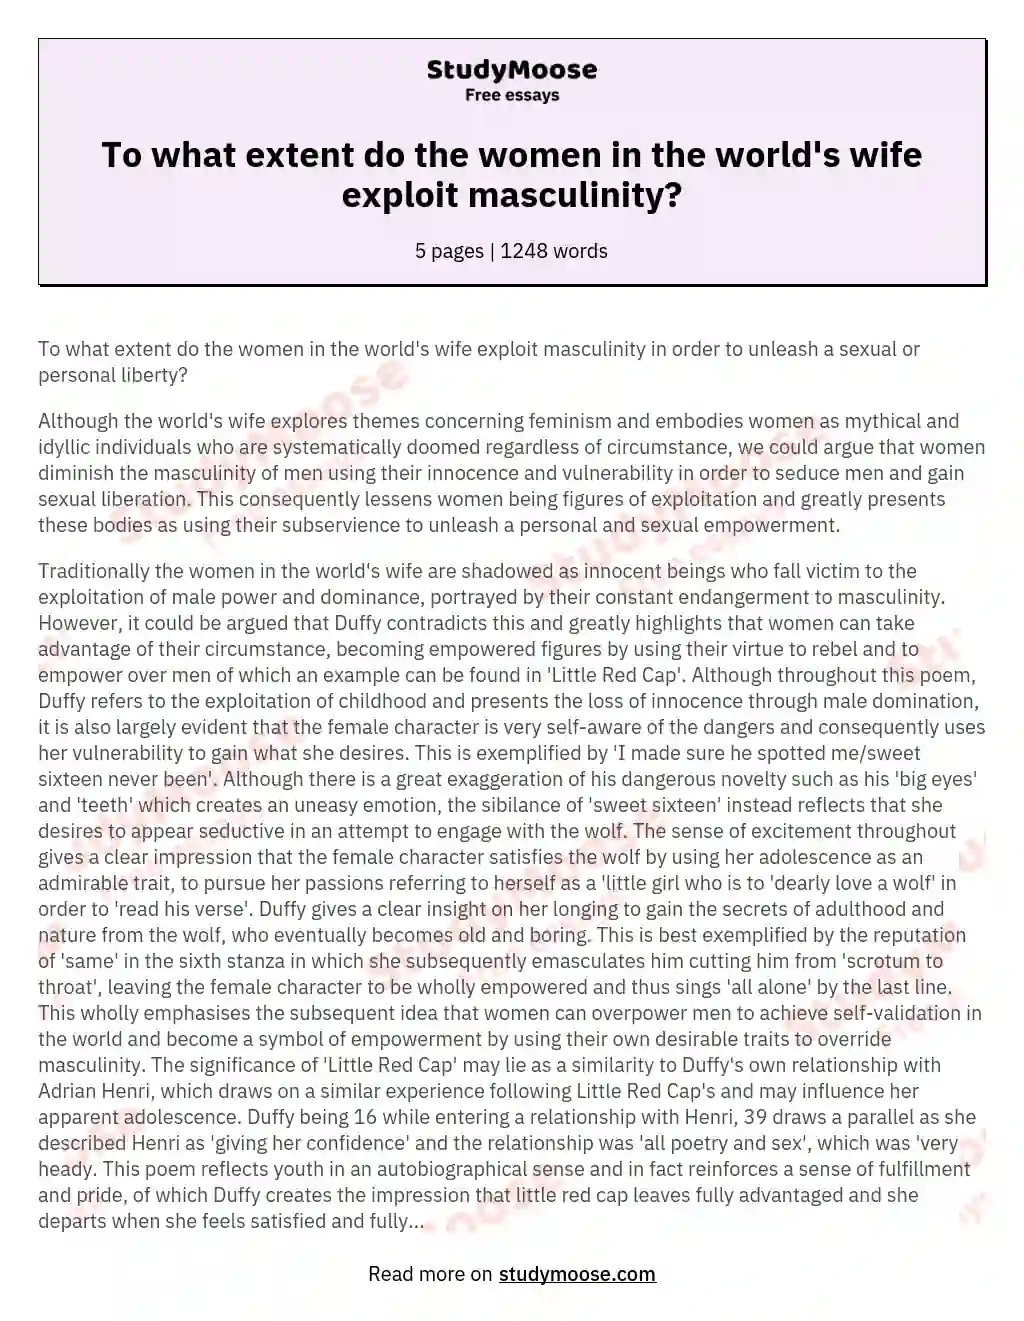 To what extent do the women in the world's wife exploit masculinity? essay